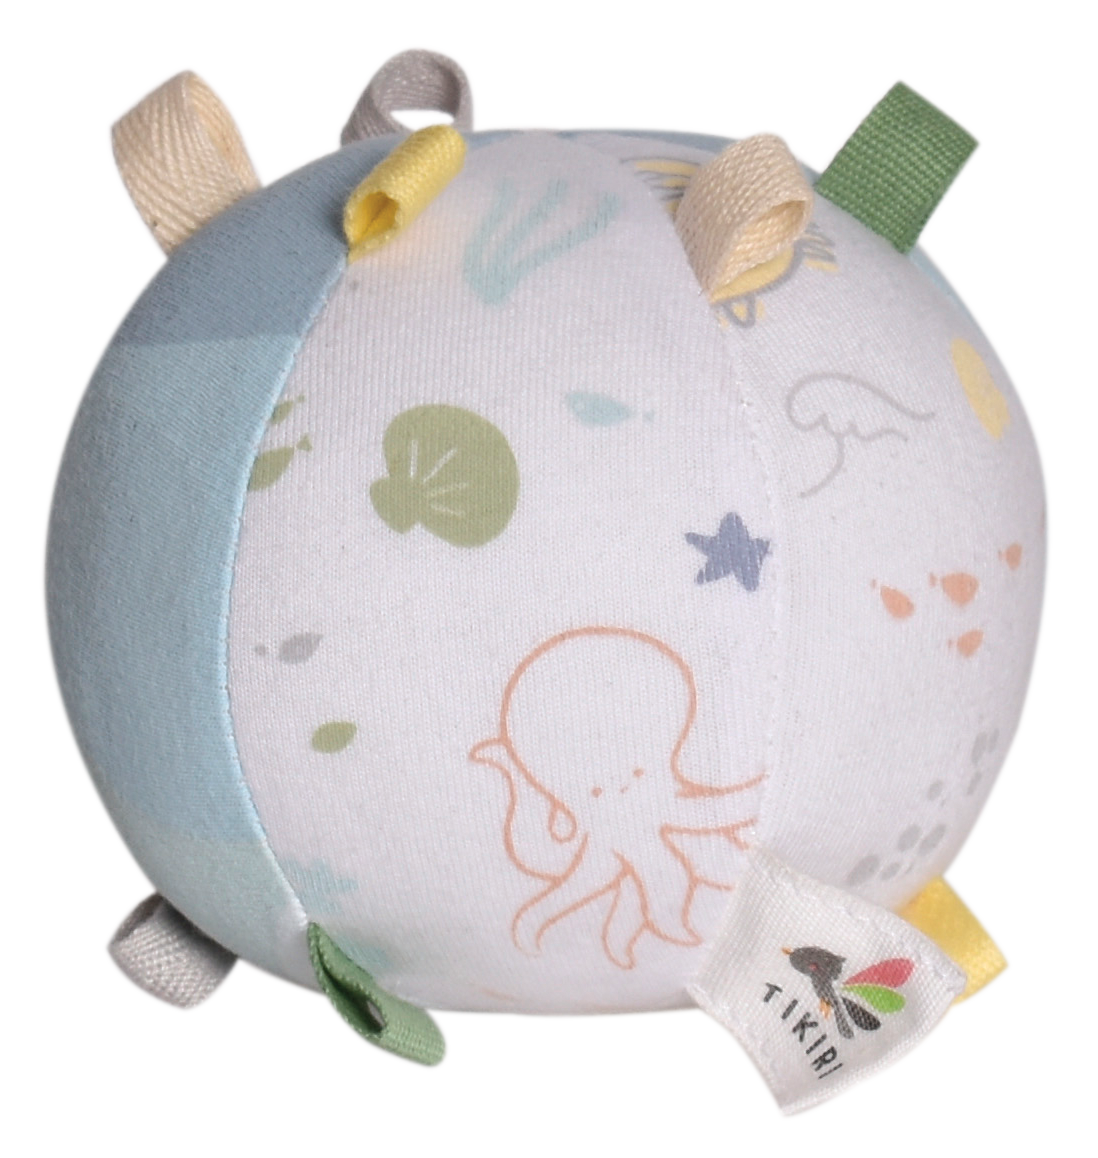 Ocean Organic Activity Ball with Rattle